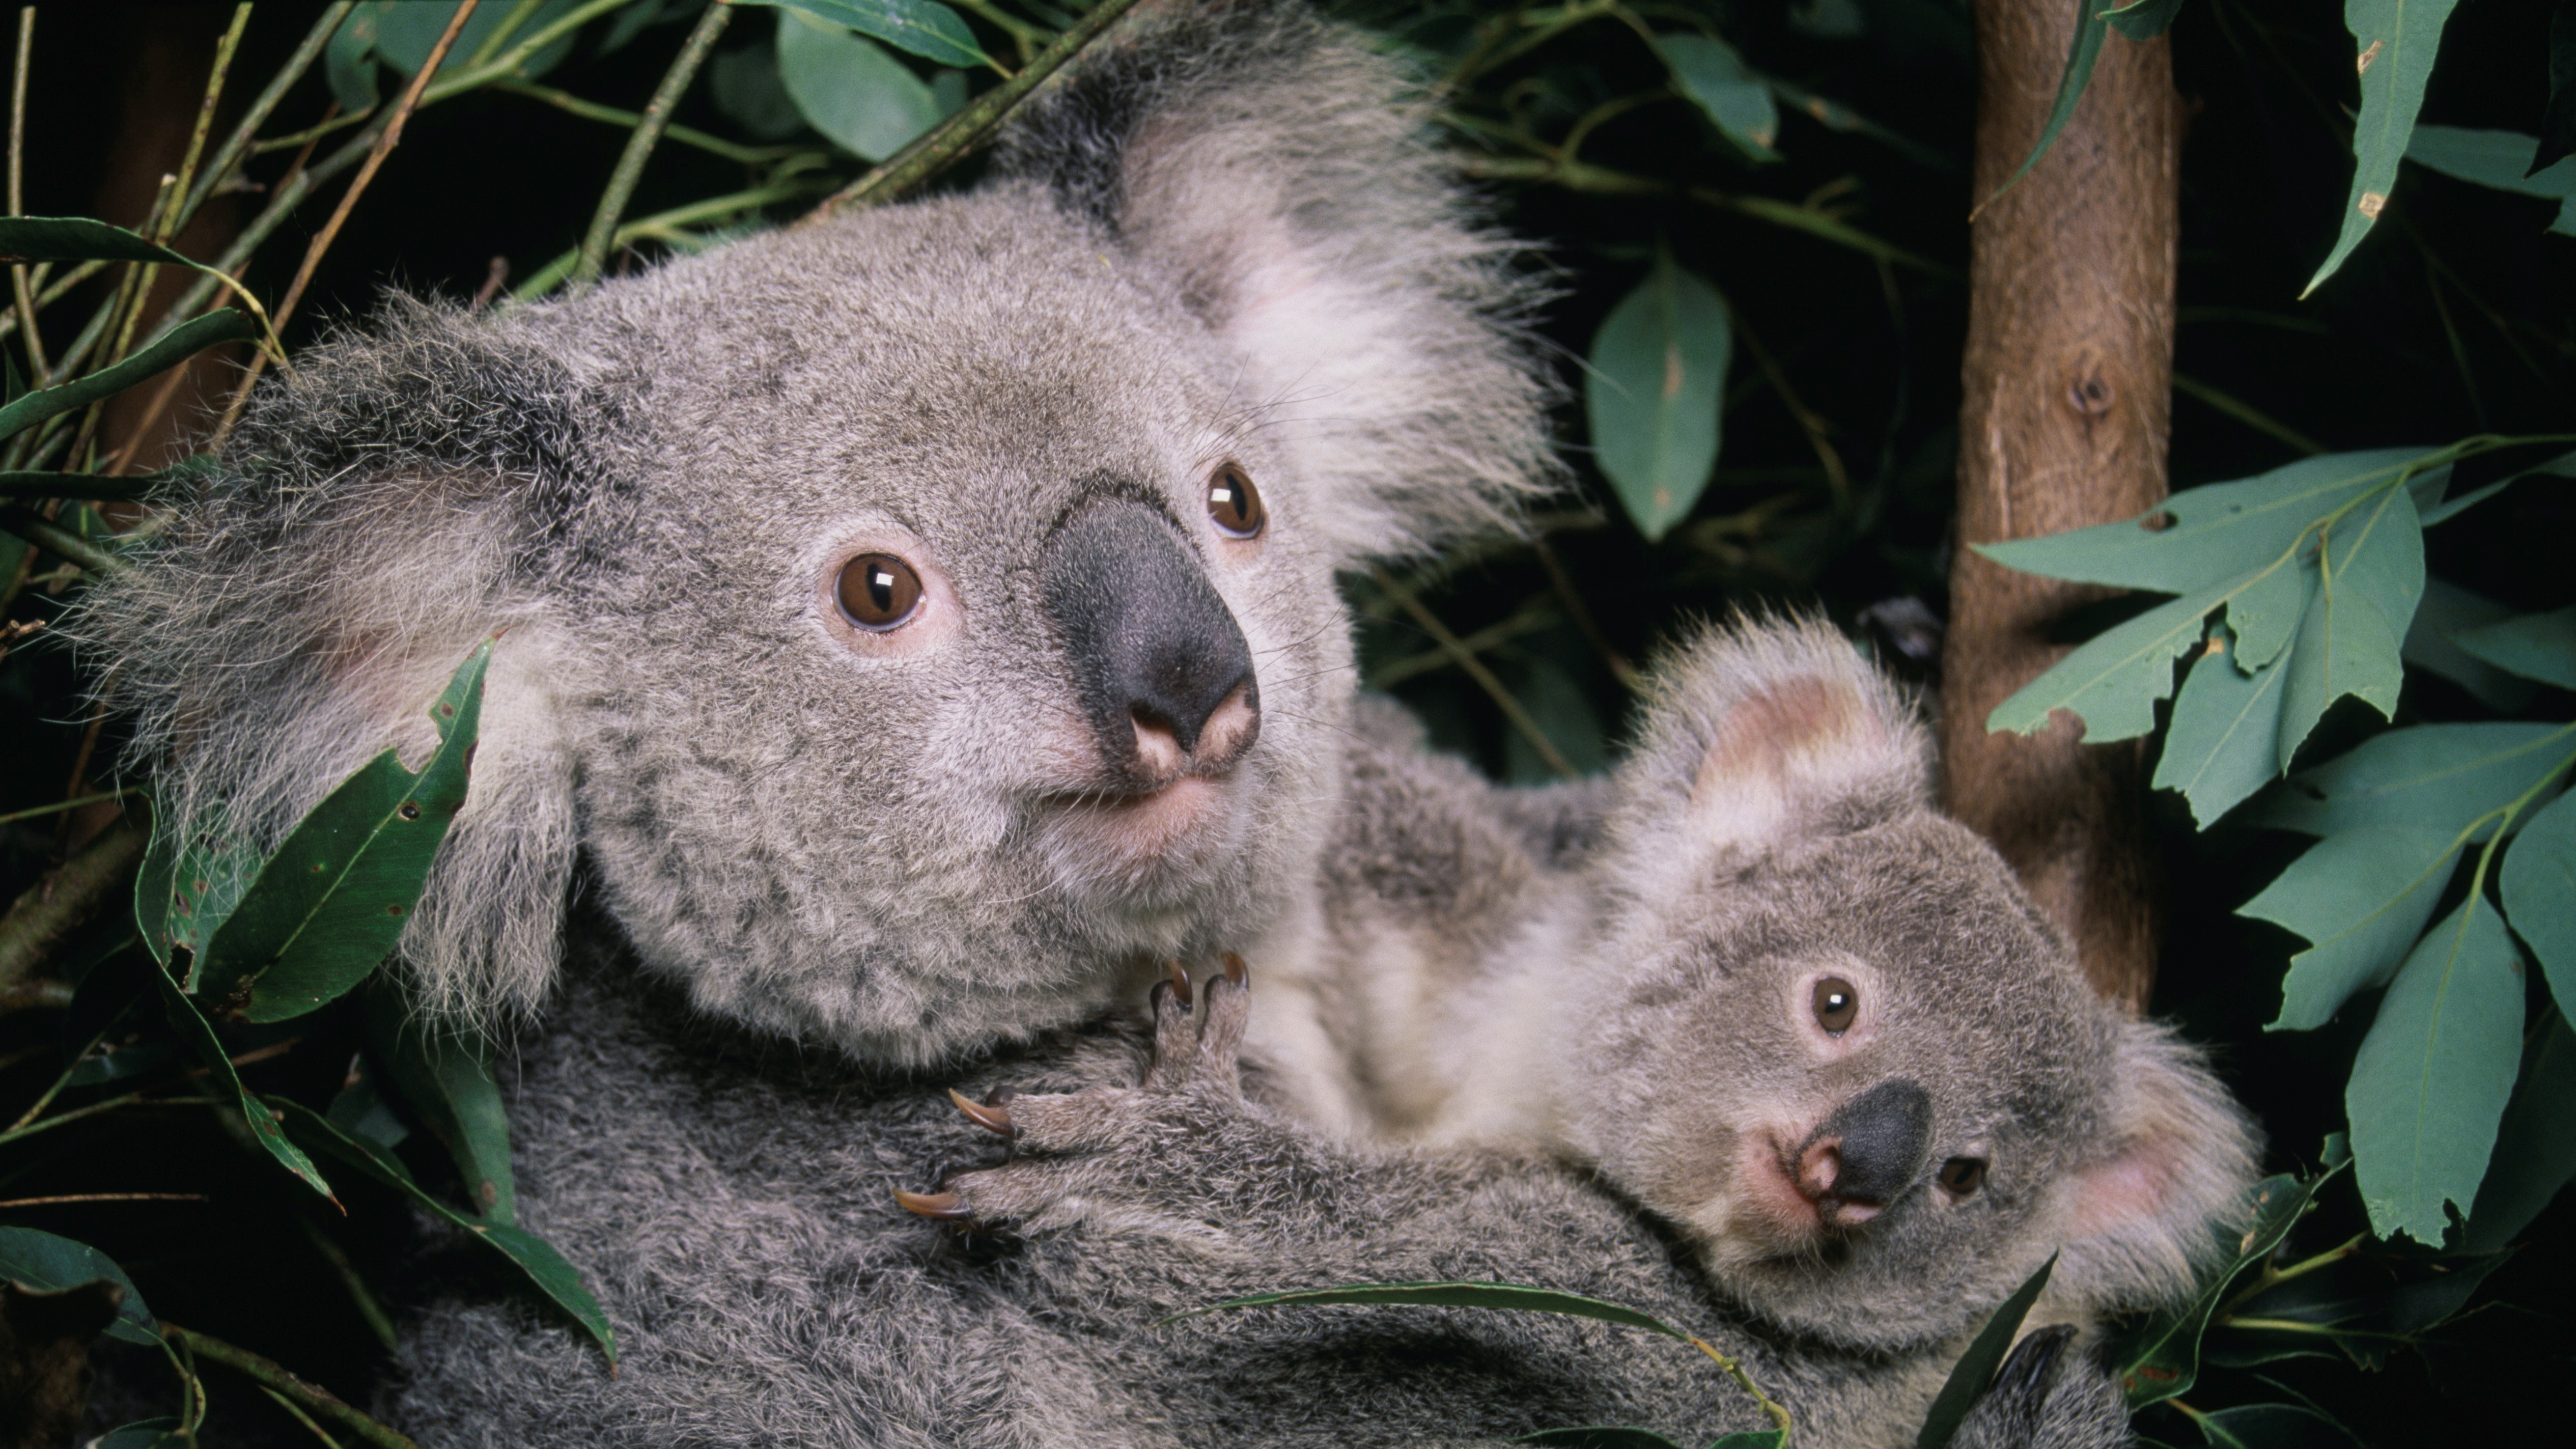 Koalas are both endangered and so plentiful they're causing